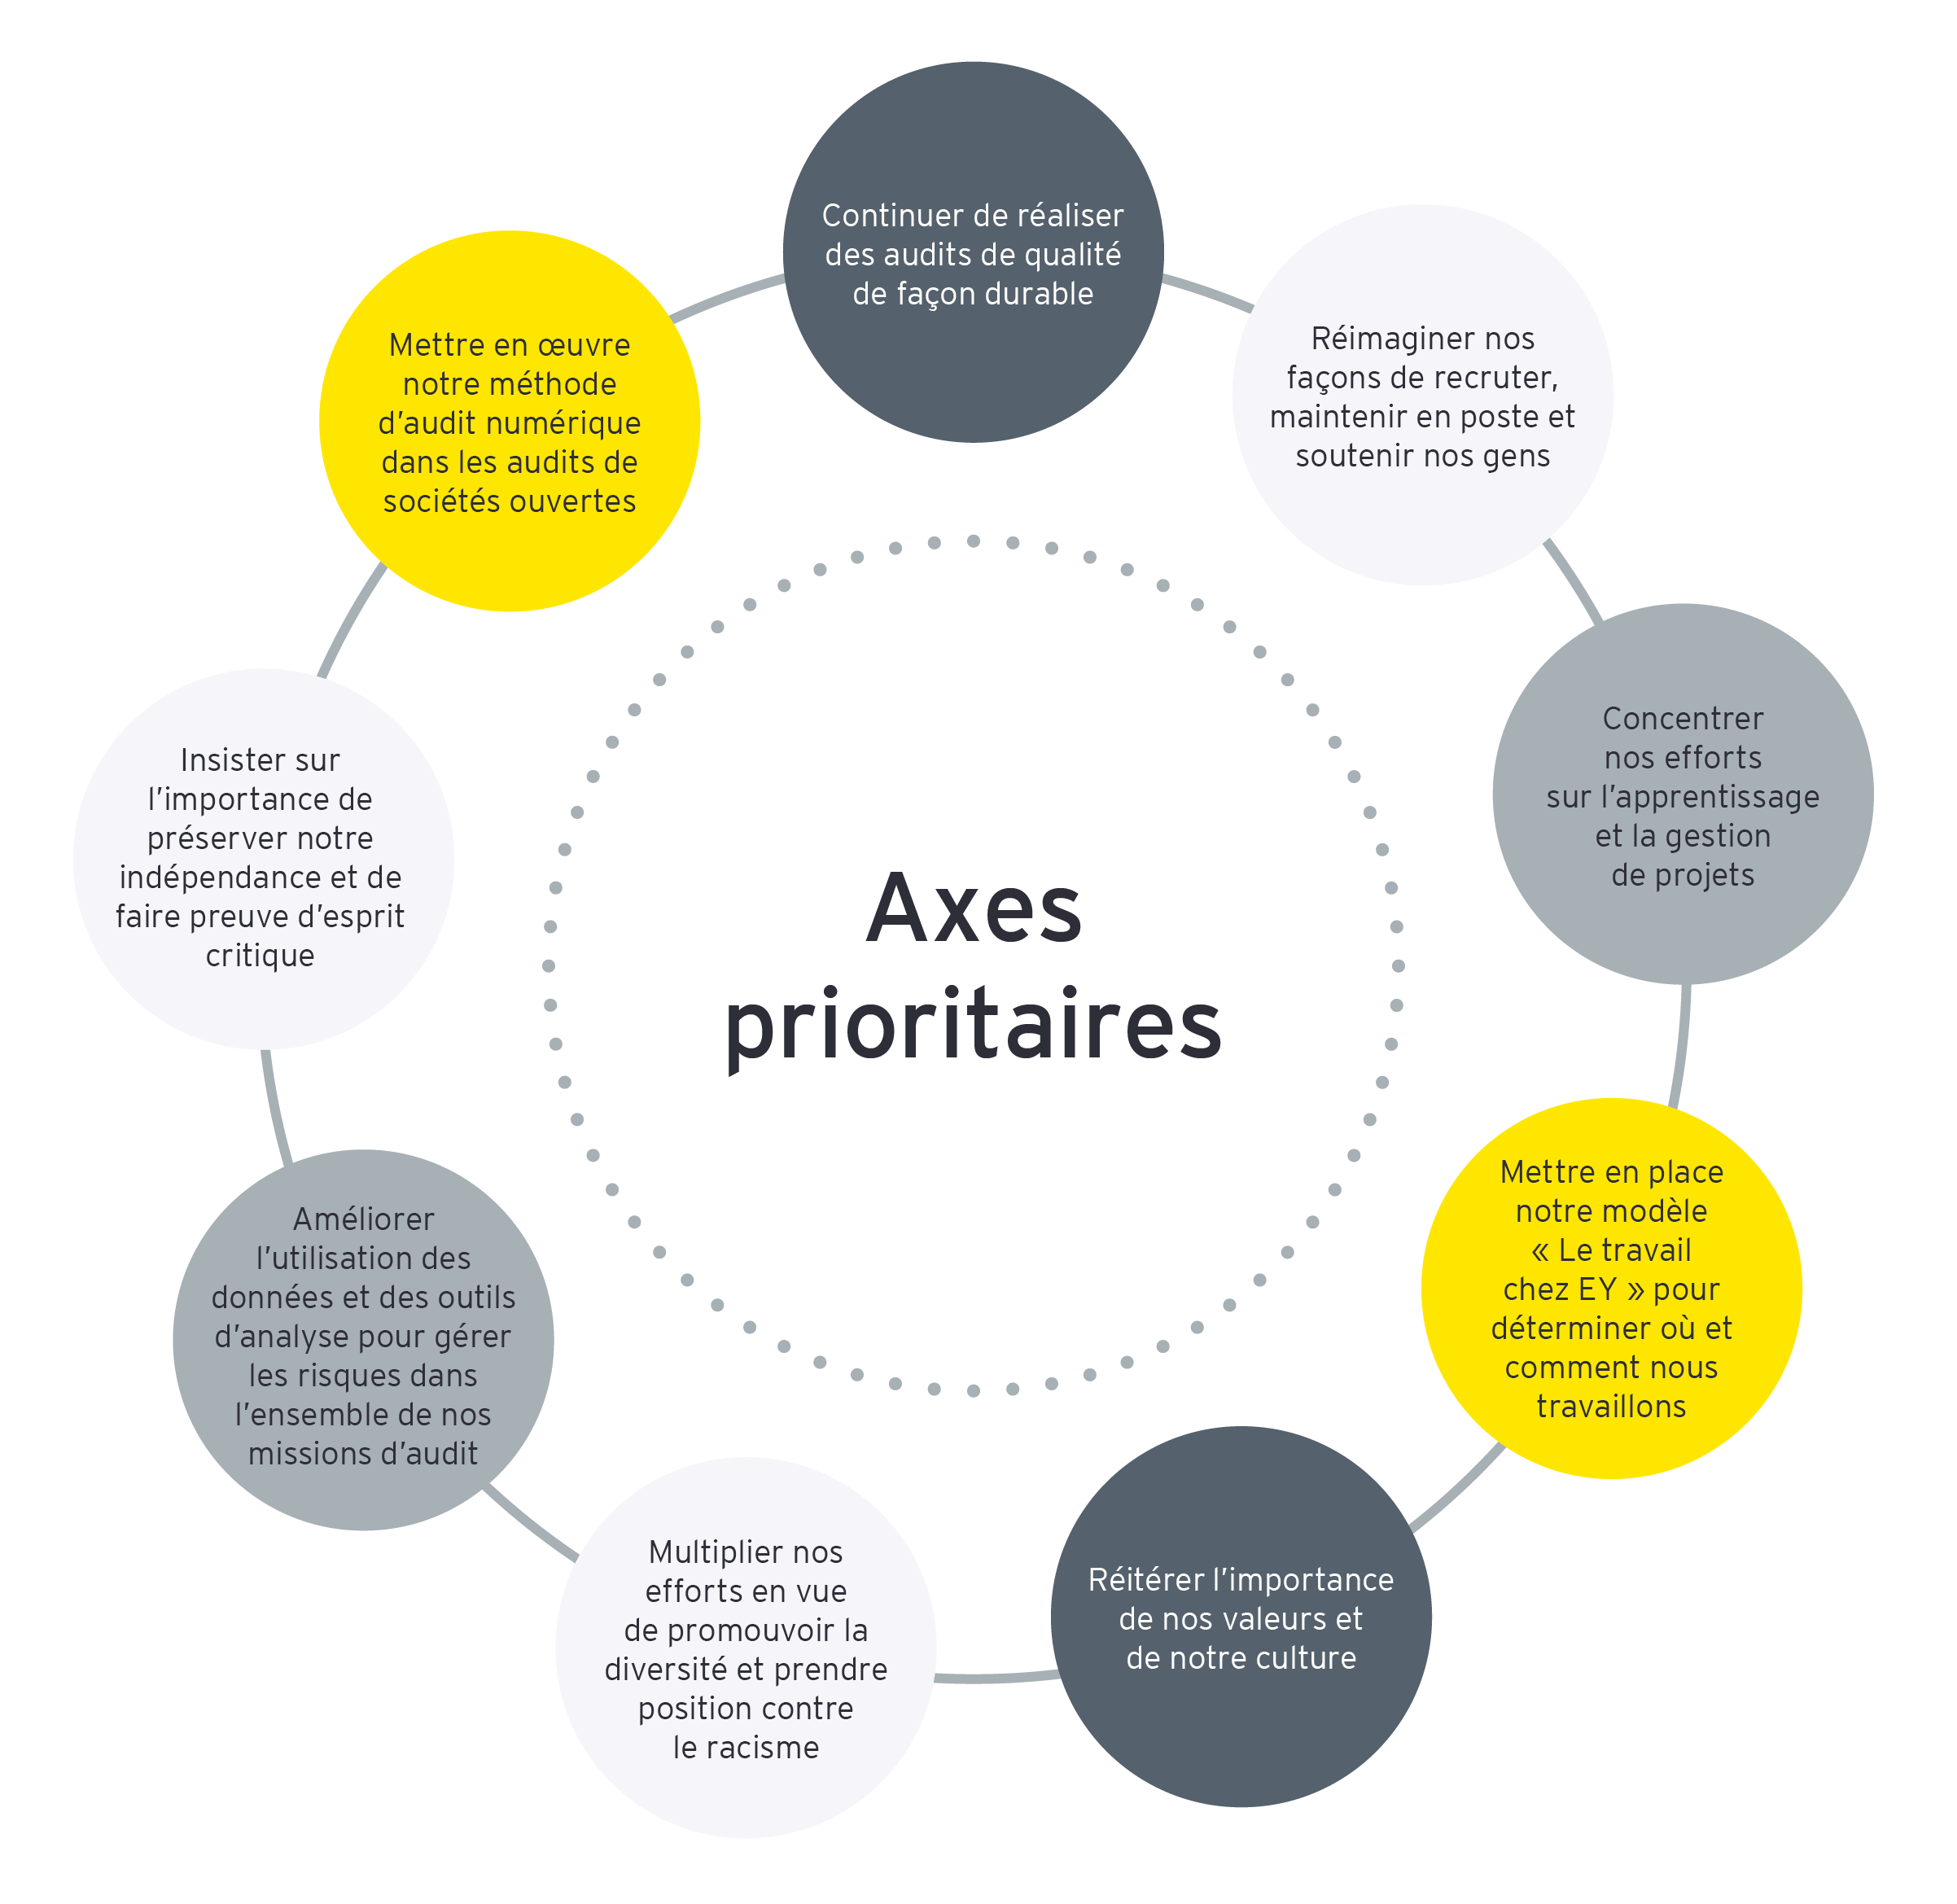 EY – Axes prioritaires